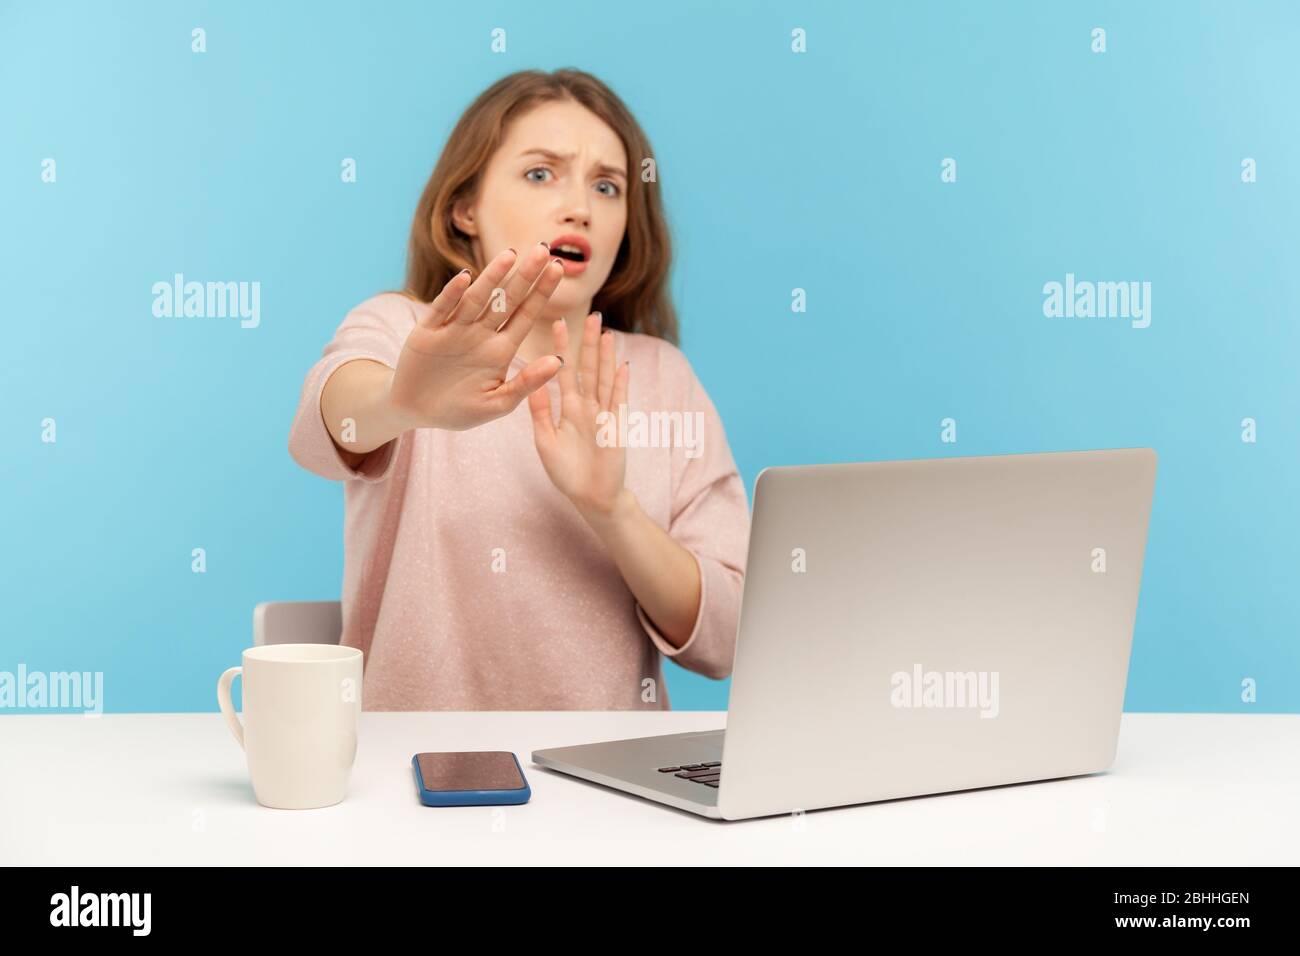 No, I'm scared! Frightened woman with shocked expression raising hands in stop gesture, defending herself, freaked out of troubles while working on la Stock Photo